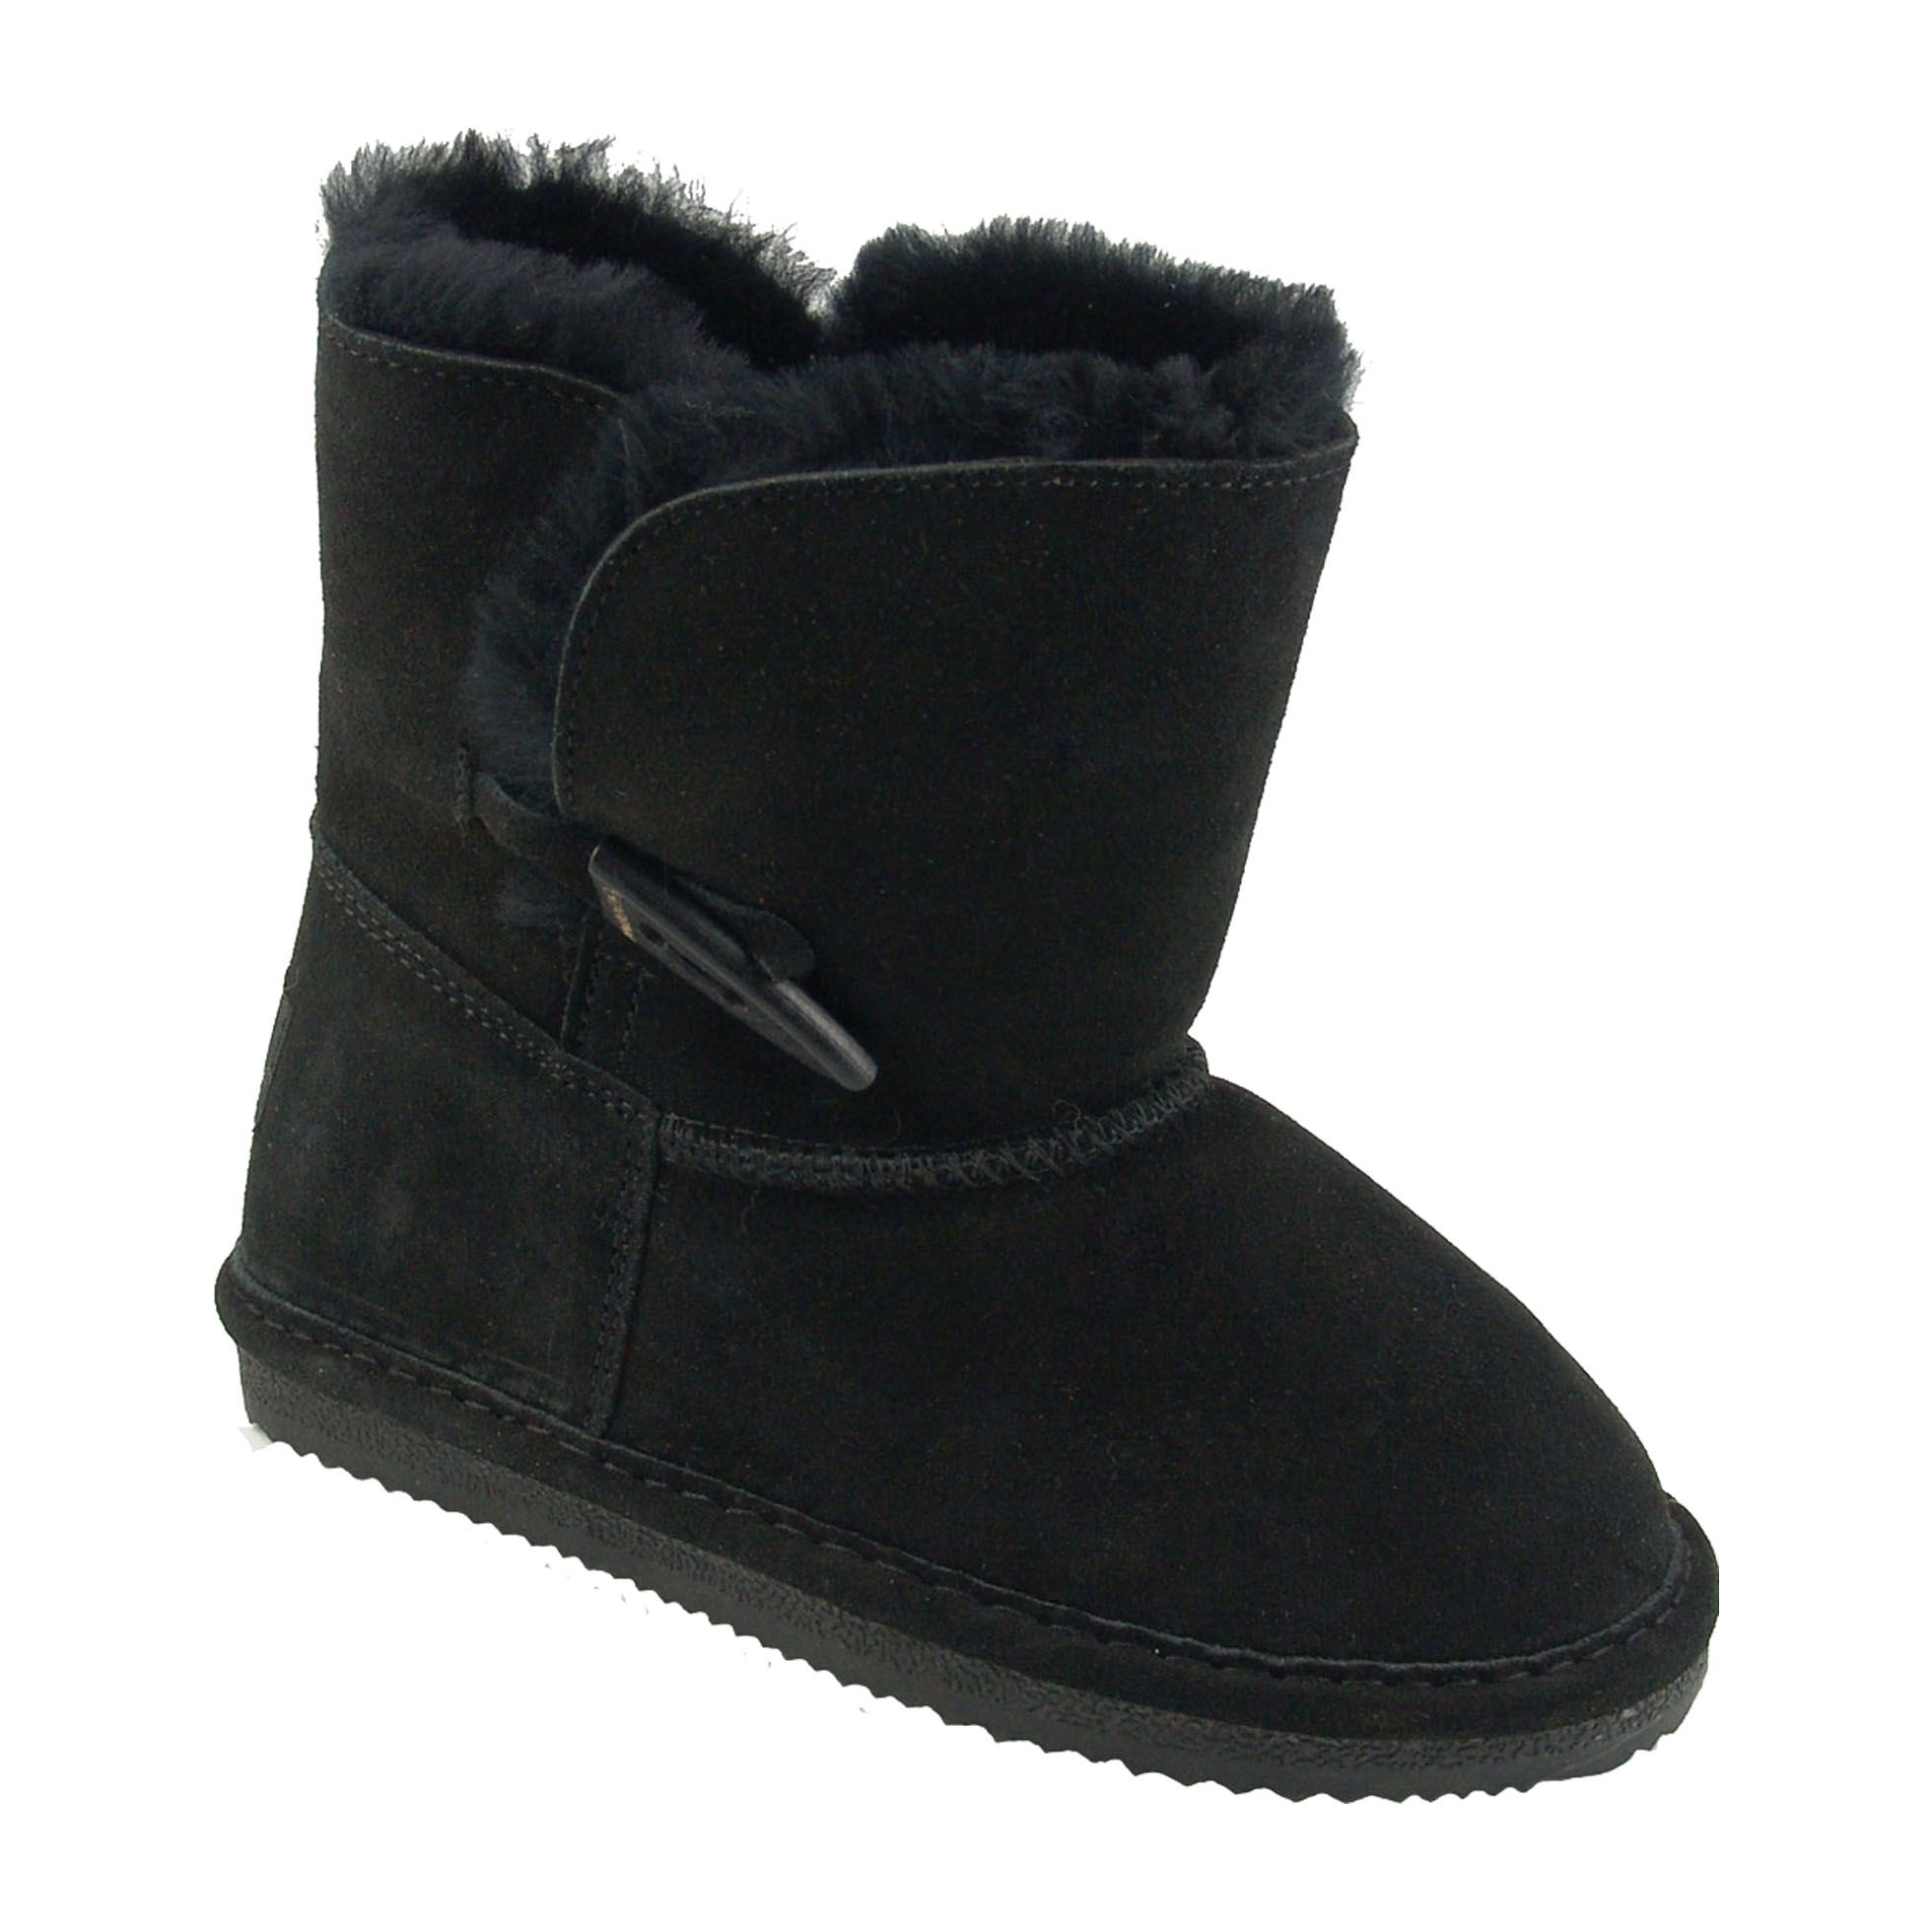 Bear Paw Girl's Abigail Shearling and Suede Fashion Boot - Black